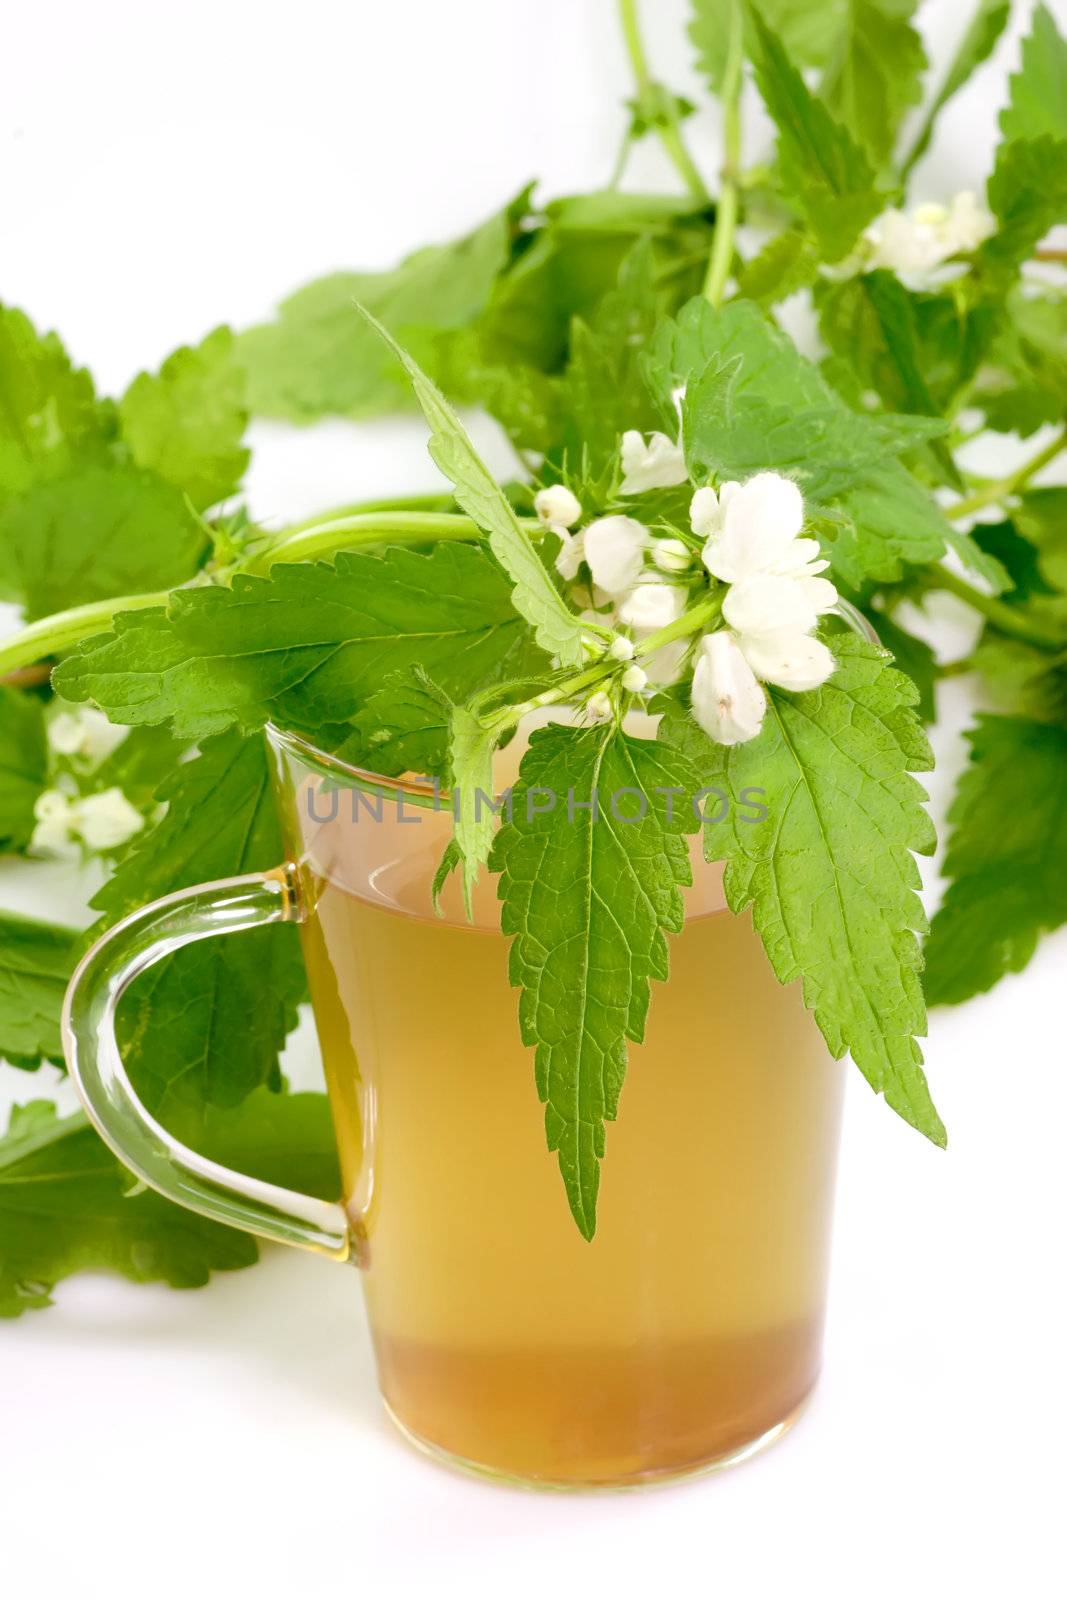 A glass of stinging nettle tea on bright background